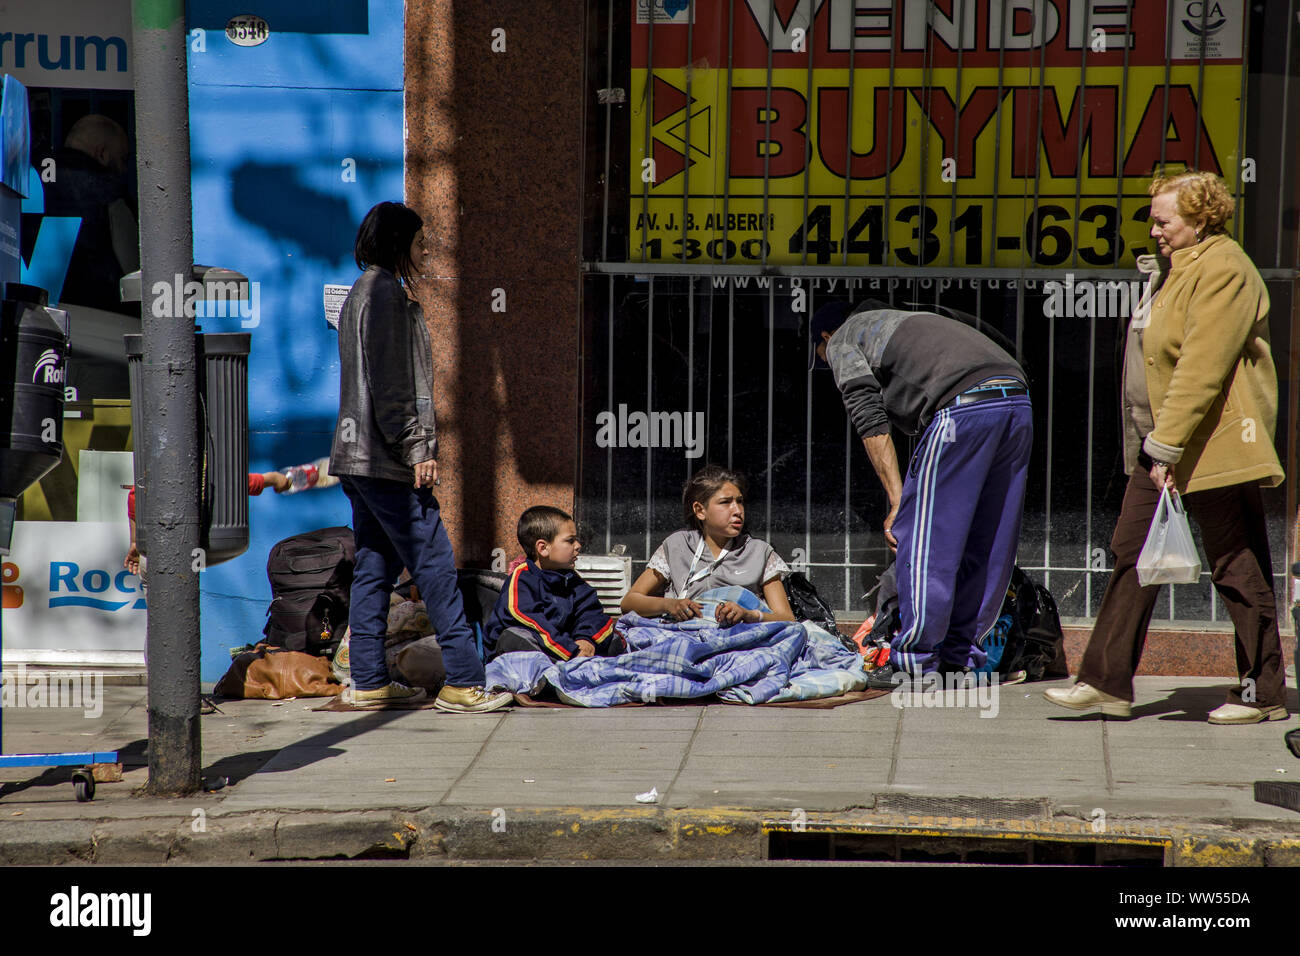 Buenos Aires, Federal Capital, Argentina. 12th Sep, 2019. An unofficial census, conducted in April of this year, by more than 50 social organizations, registered 7,251 people in a street situation in the city of Buenos Aires.Of the total, 5,412 people live outdoors, in squares, thresholds of buildings or directly on sidewalks of the City of Buenos Aires, according to what the volunteers collected in the 2nd popular census. This census revealed an important growth of homeless people in the city of Buenos Aires compared to 2017.These numbers mark a strong contrast to the official figures. Credit Stock Photo